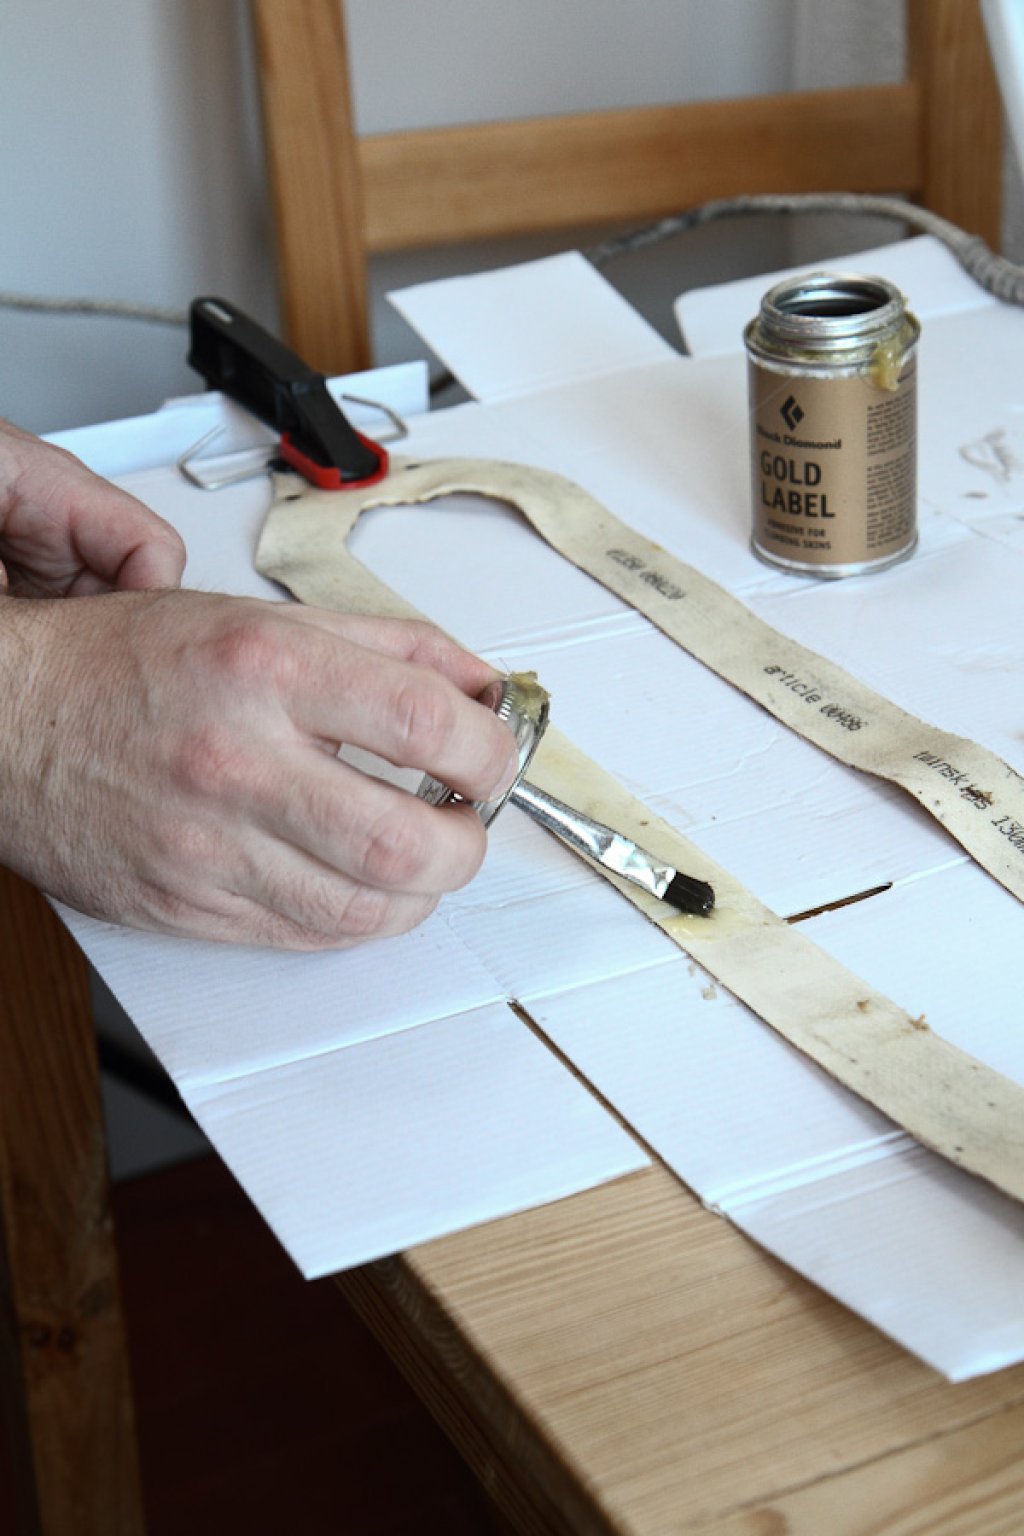 Apply a thin, even layer of new adhesive. Repeat if necessary after a short drying phase